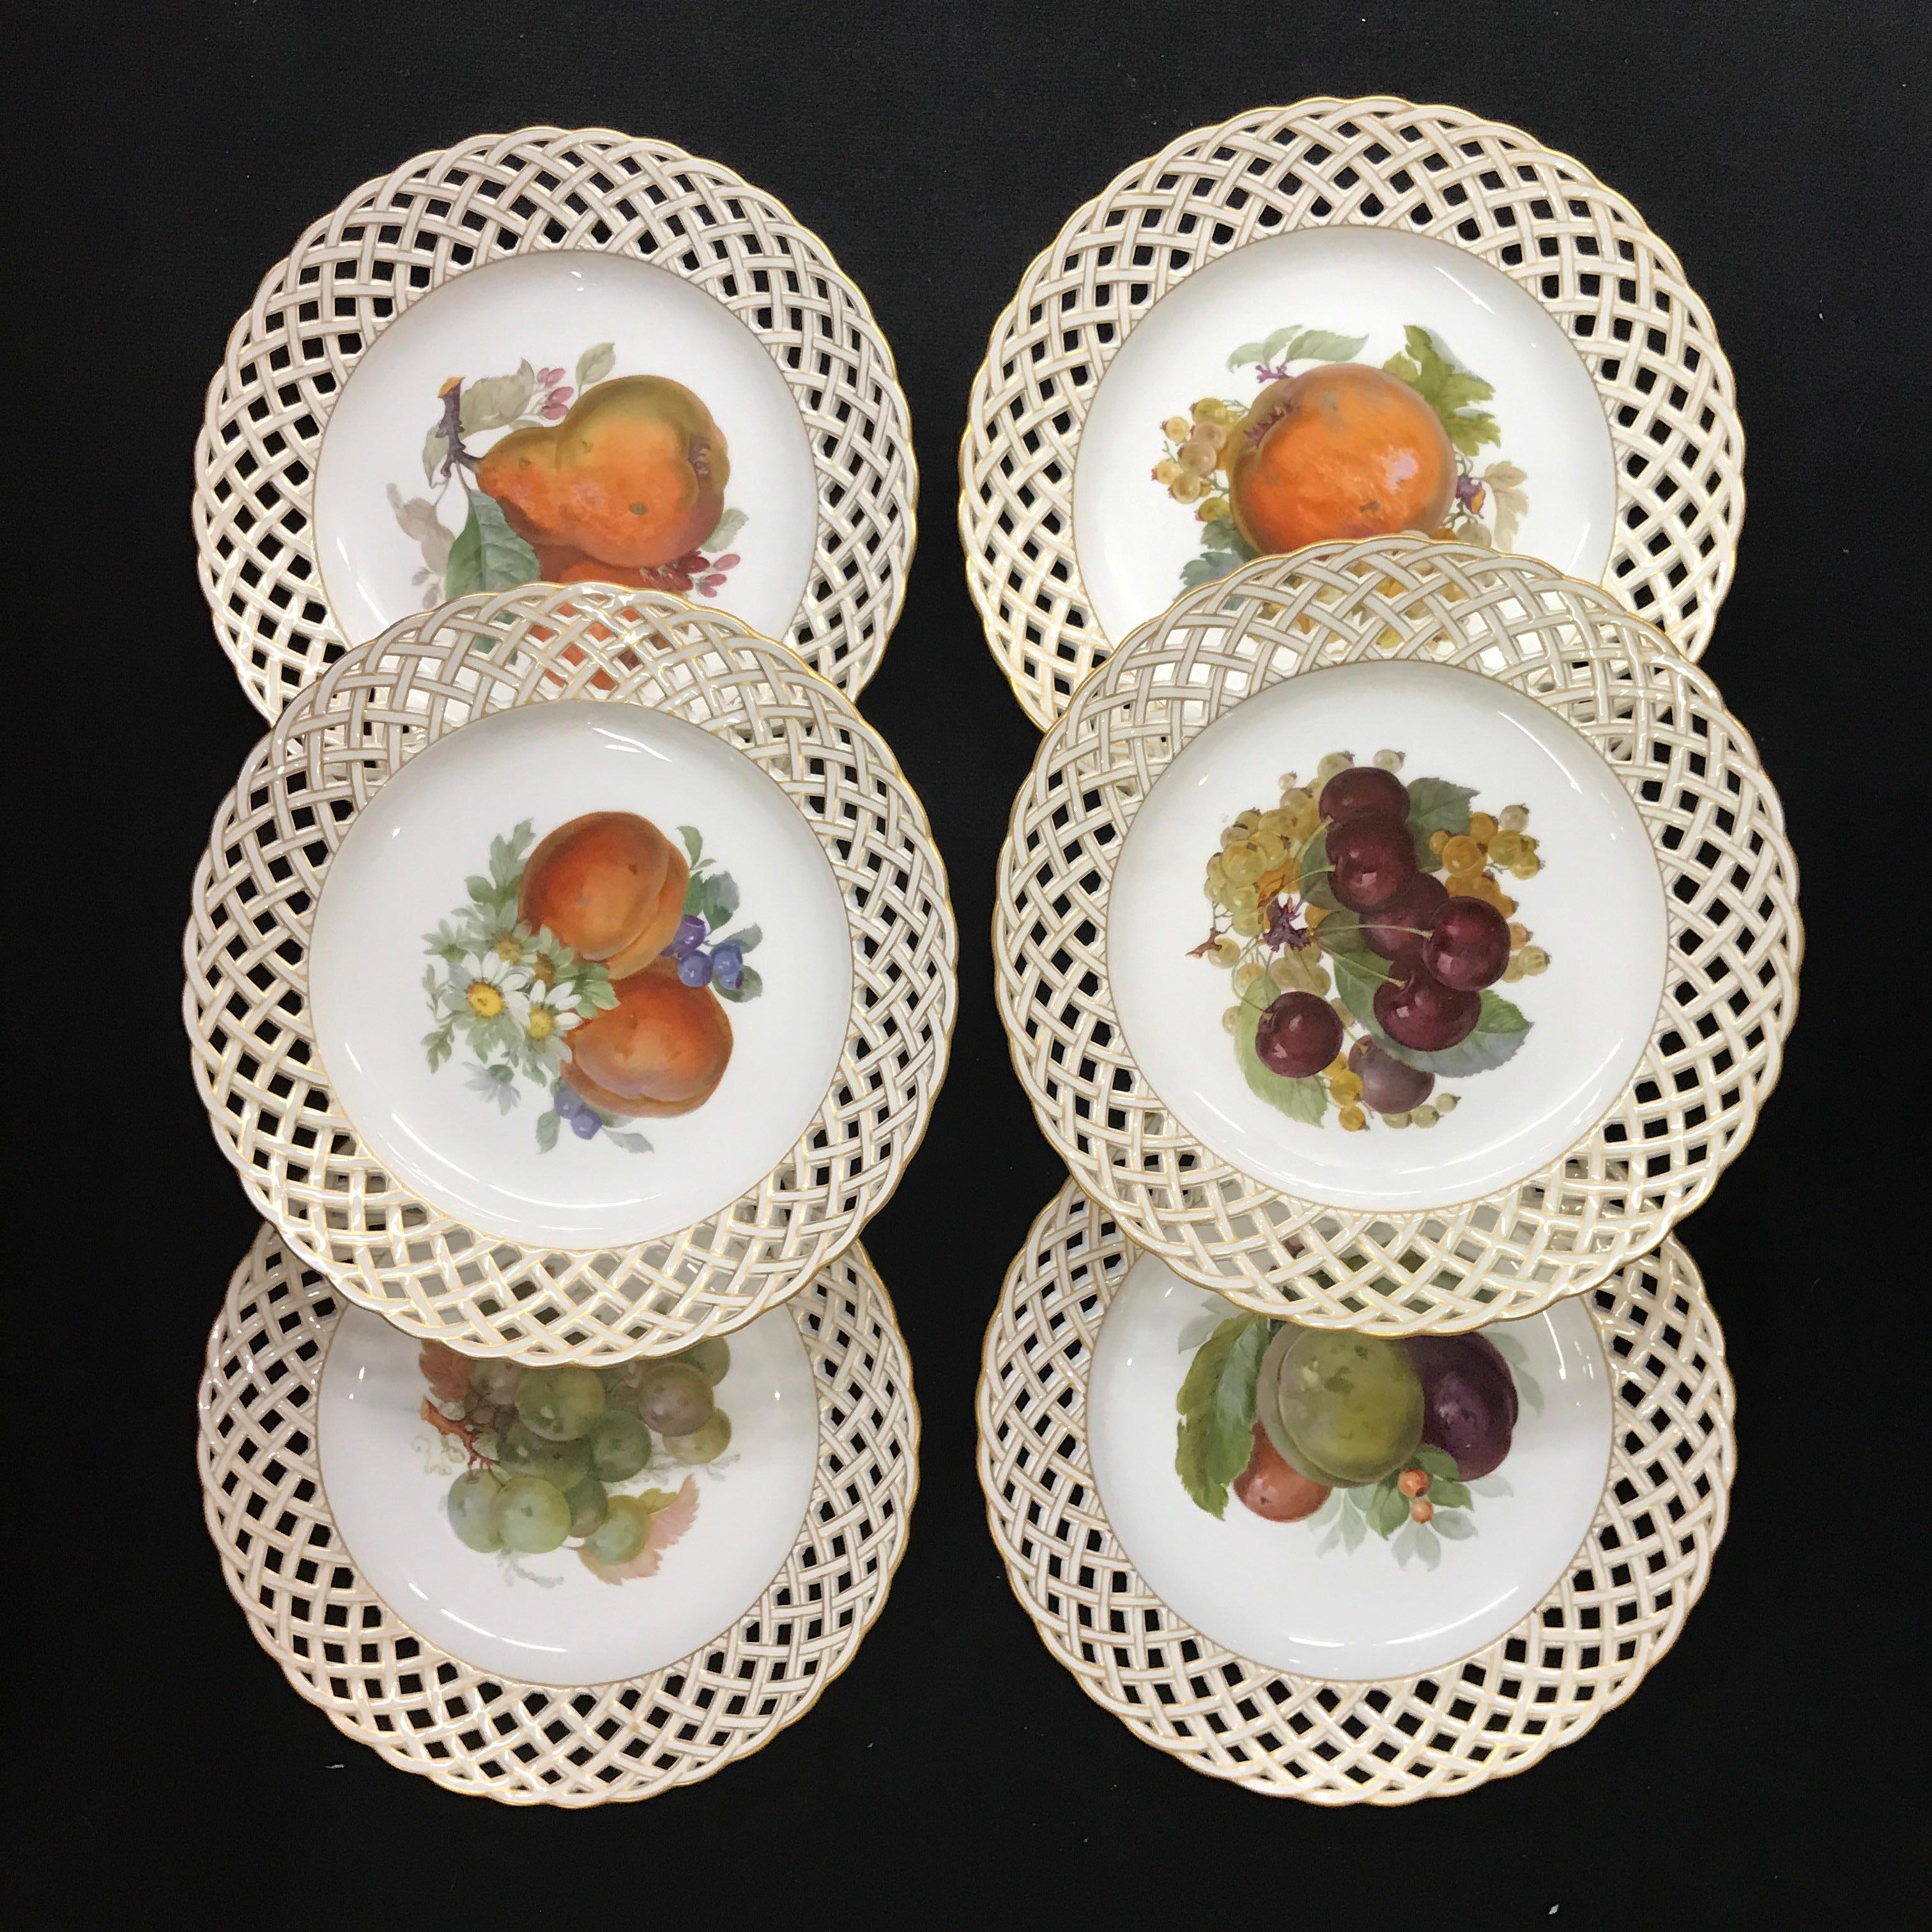 A set of six KPM fruit reticulated plates, each one painted with central lush fruits and flowers, pierced gilt borders, all marked KPM and orb mark, one plates bears the 1763-1913 Anniversary mark.